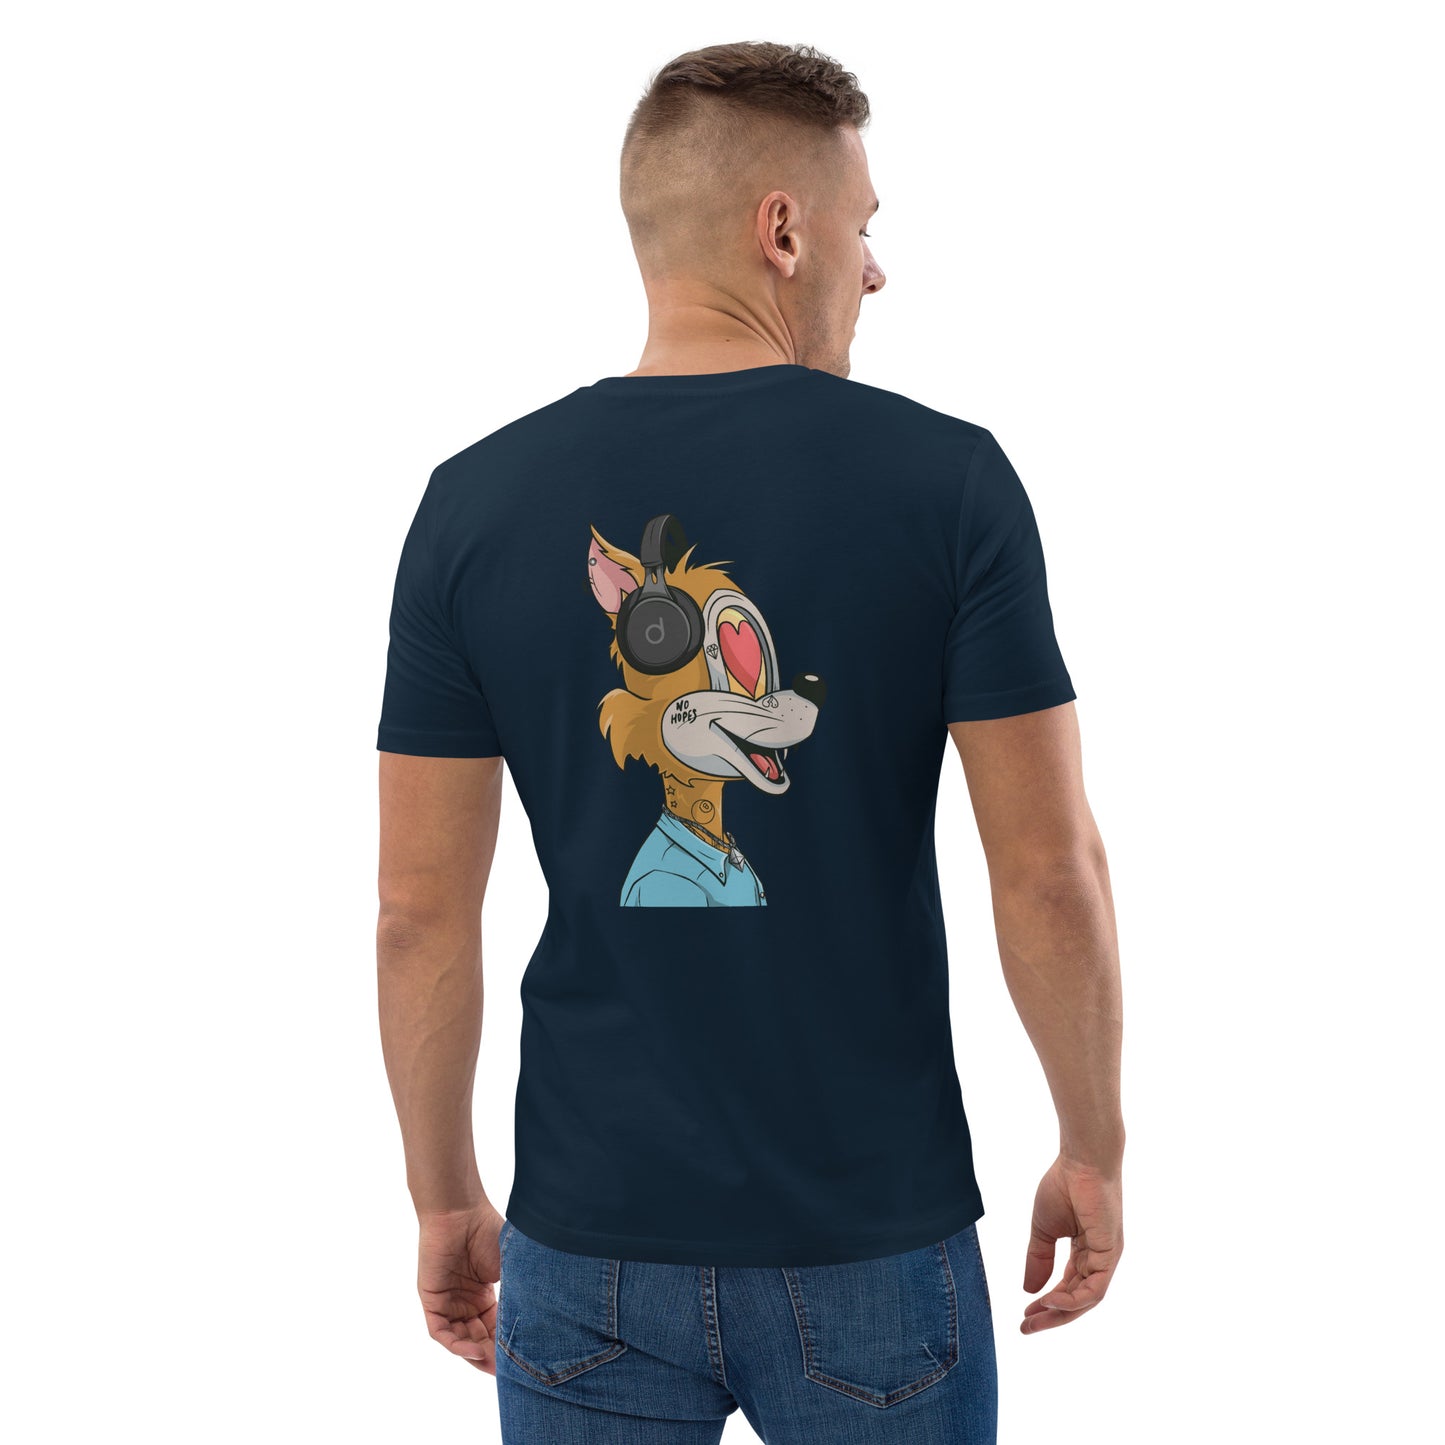 Unisex organic cotton t-shirt feat TOON #2425 (front embroidered + rear print)